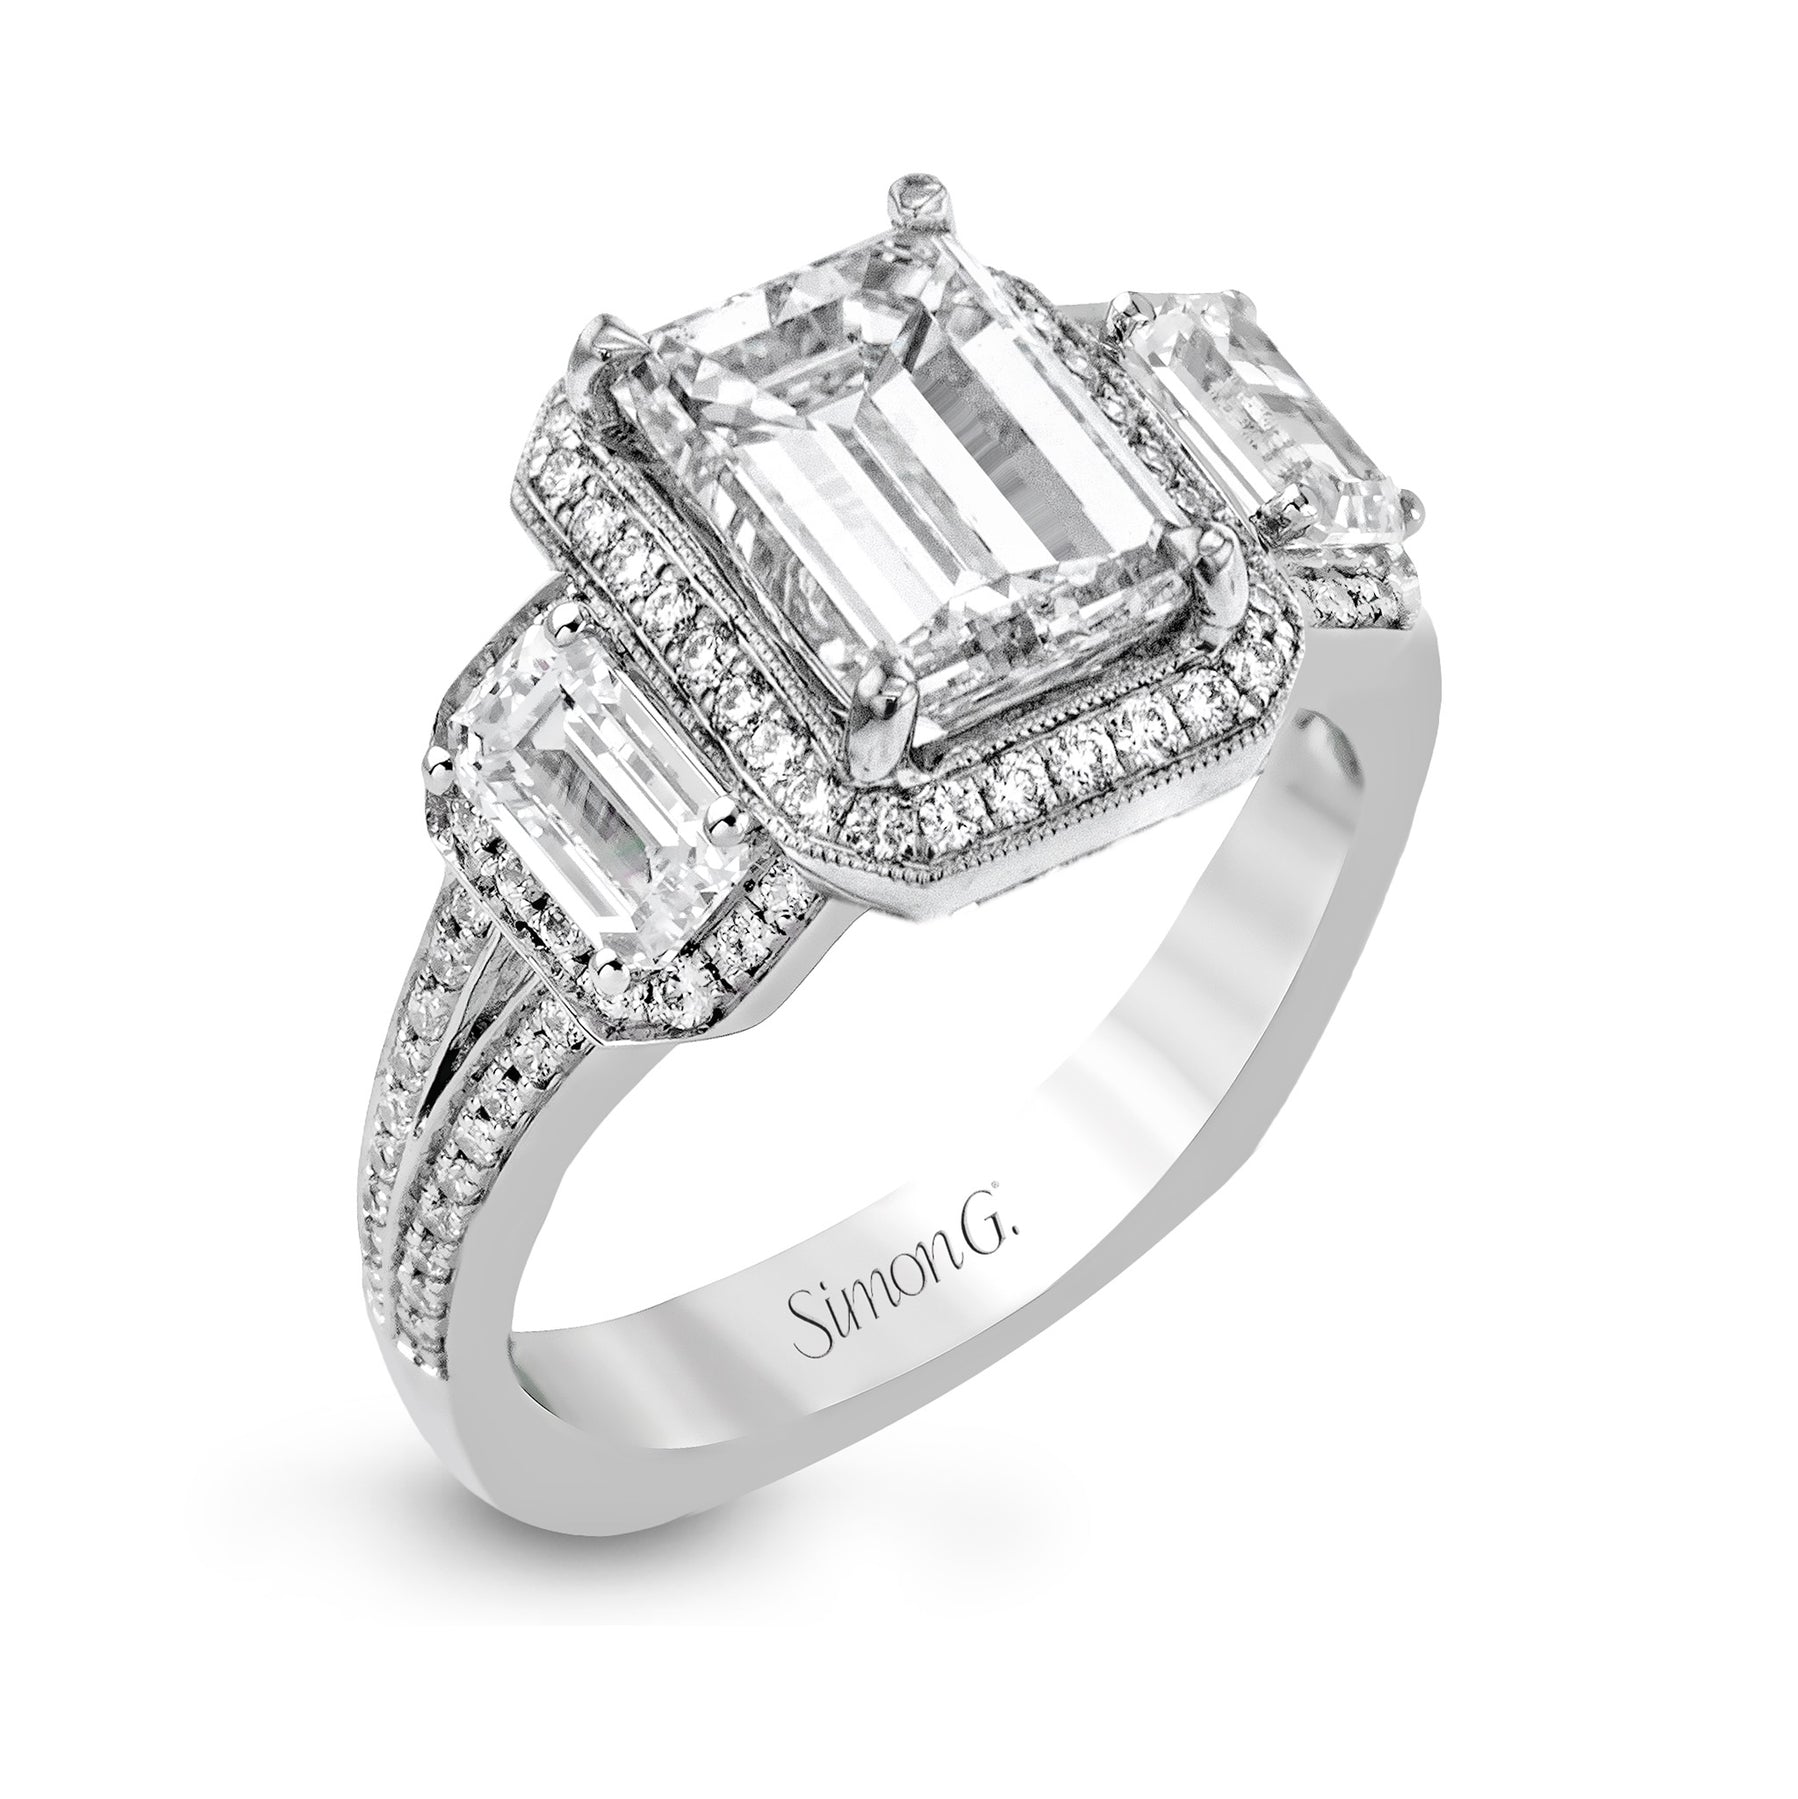 Emerald-Cut Three-Stone Halo Engagement Ring In 18k Gold With Diamonds TR446-EM